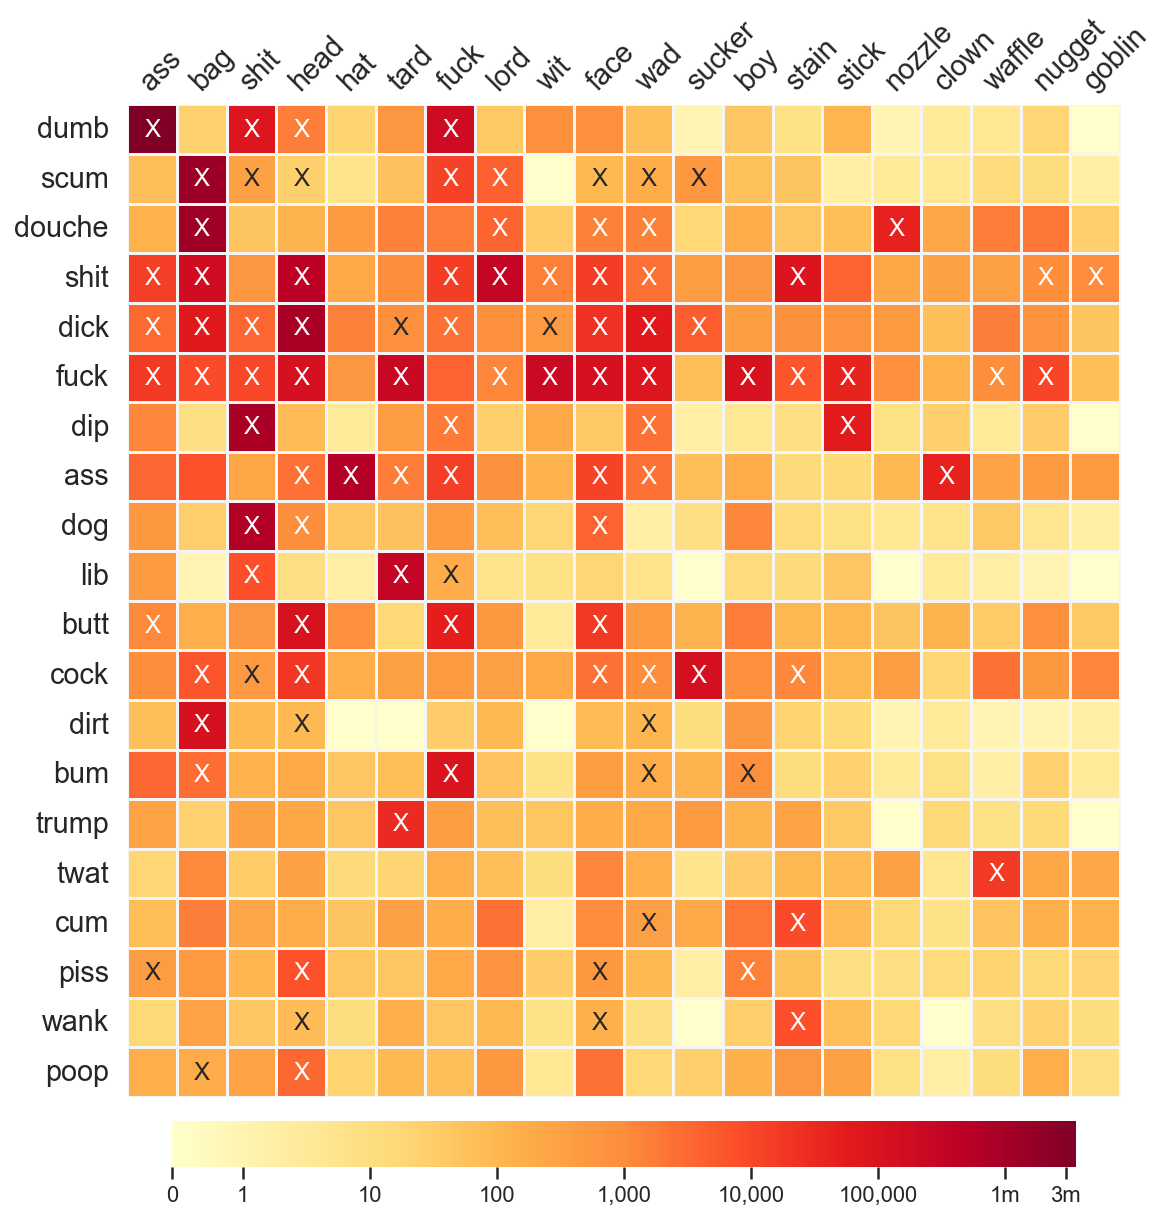 Heatmap matrix, with an "X" glyph added to compounds which have a definition on Wiktionary